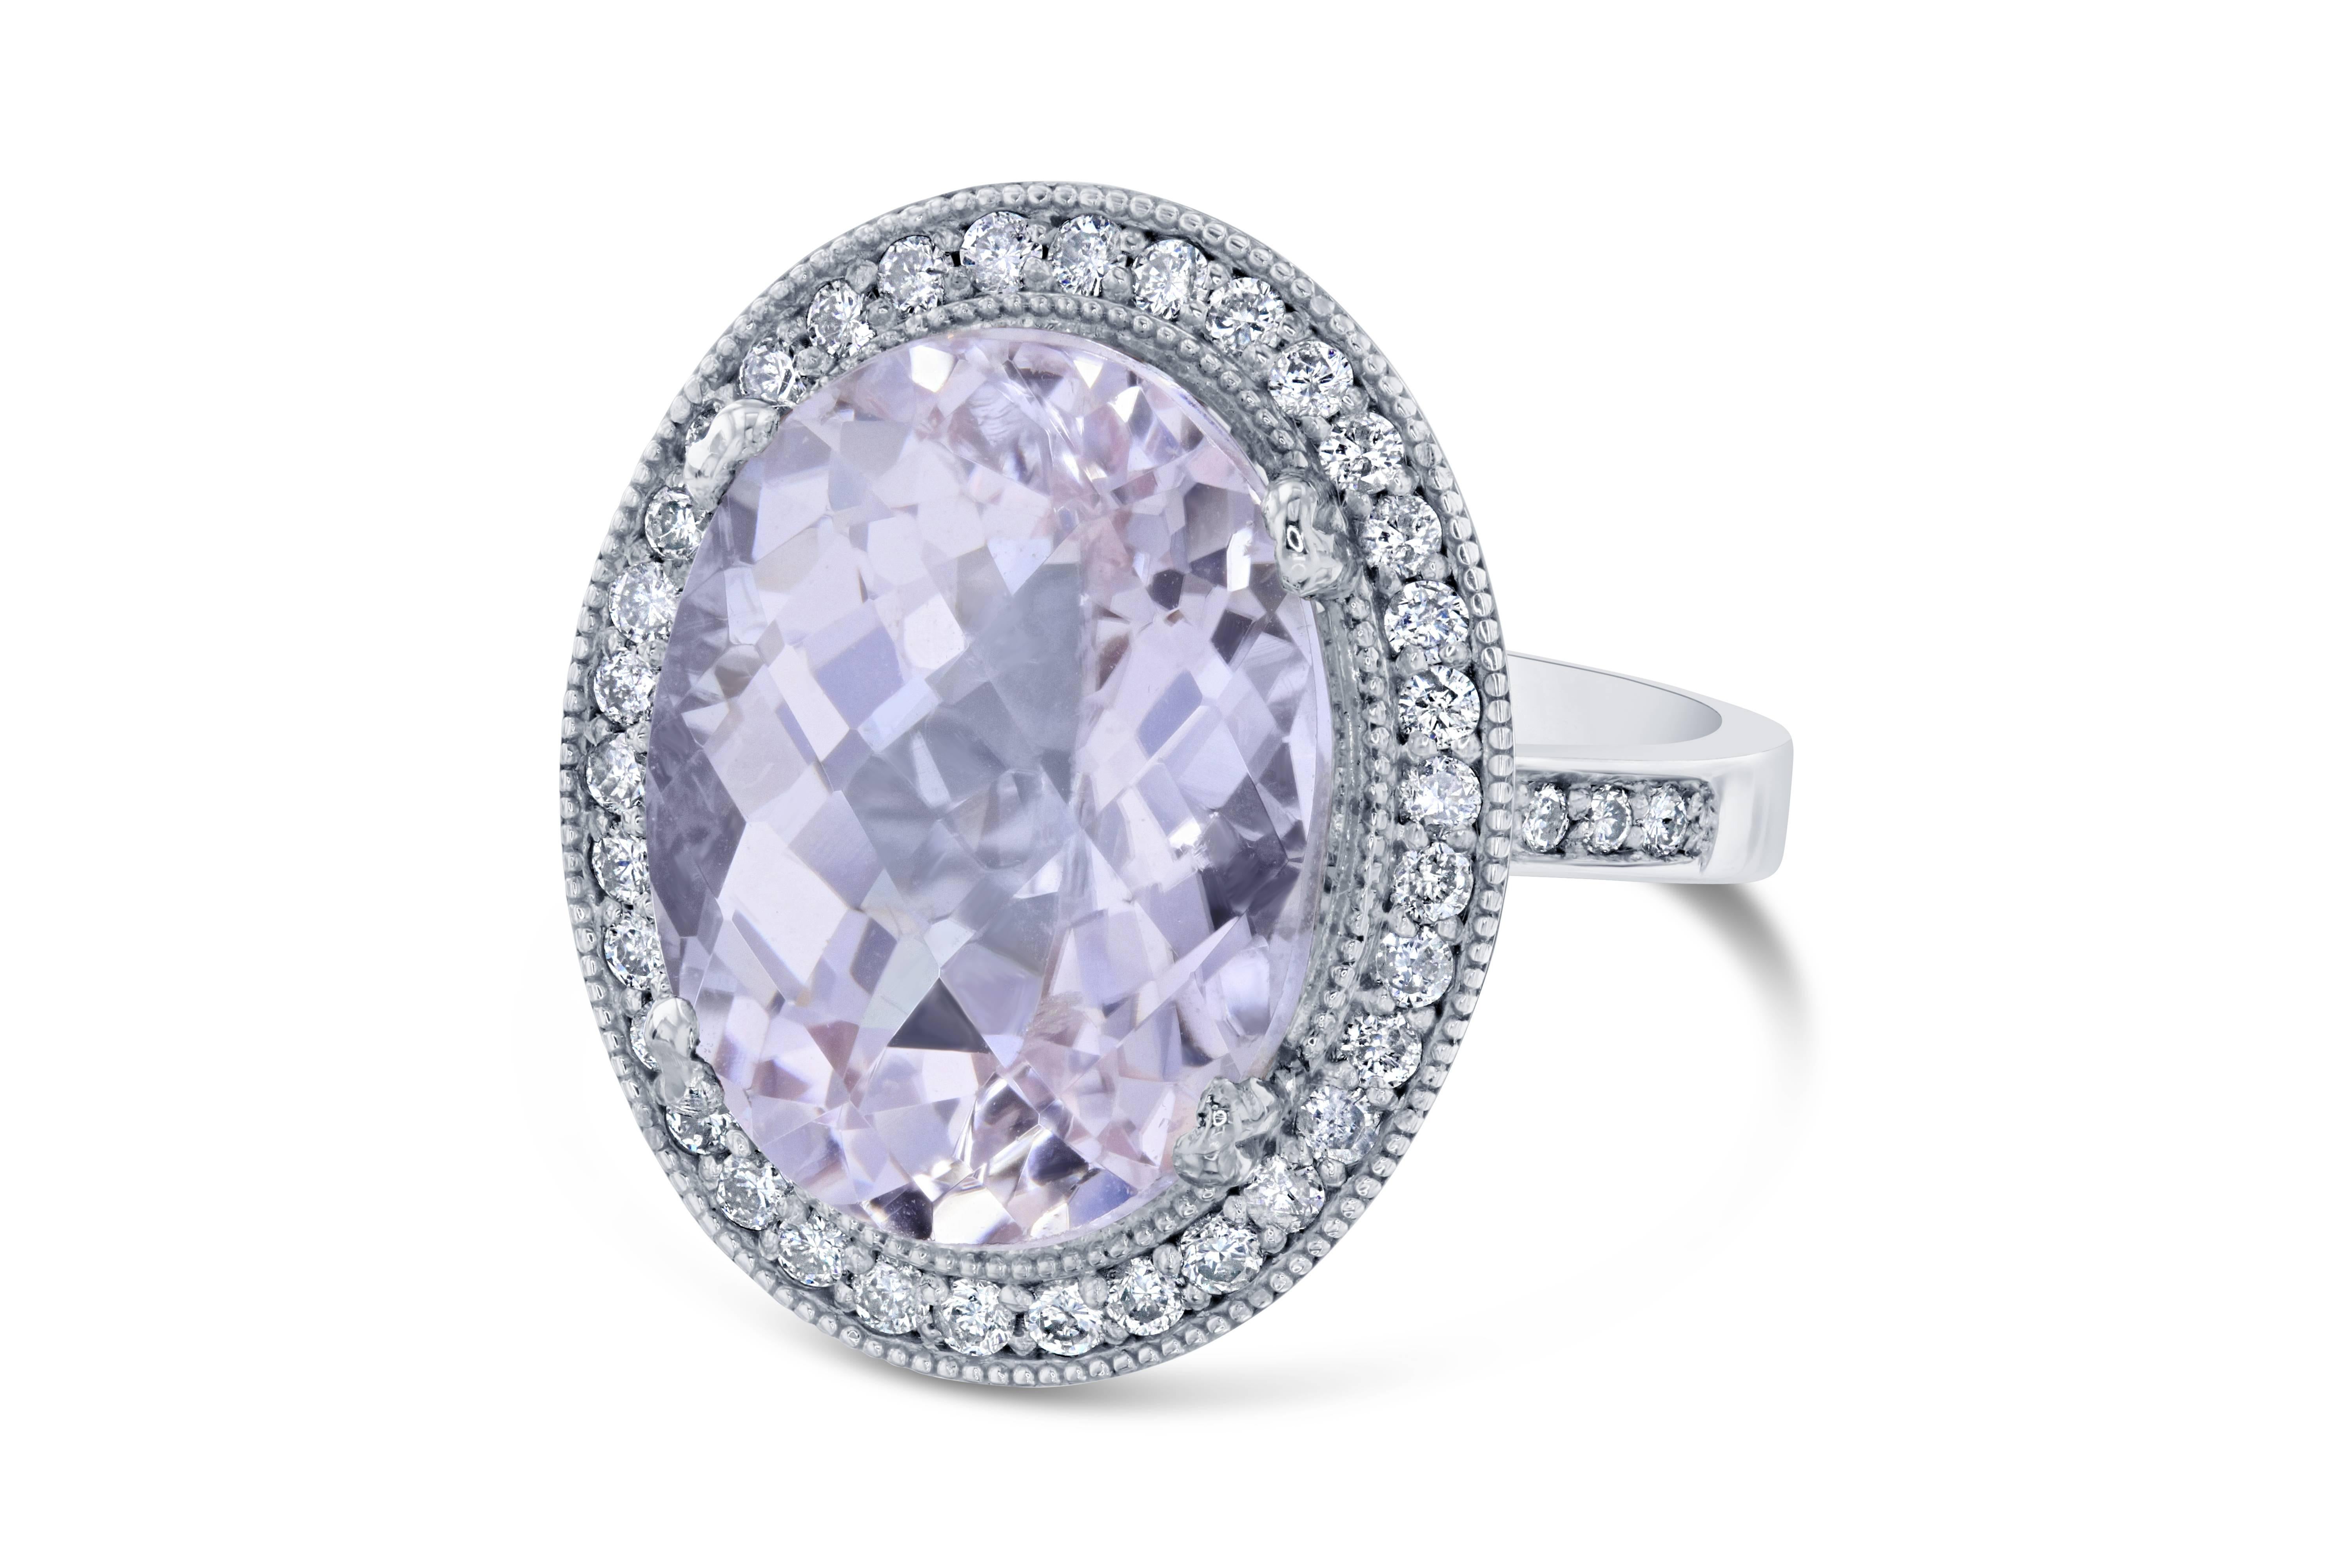 This beautiful Cocktail ring has a huge Oval Cut Kunzite that weighs 11.11 carats in the center of the ring.  The Kunzite is surrounded by 44 Round Cut Diamonds that weigh 0.52 carat. The total carat weight of the ring is 11.63 carats.  The ring is